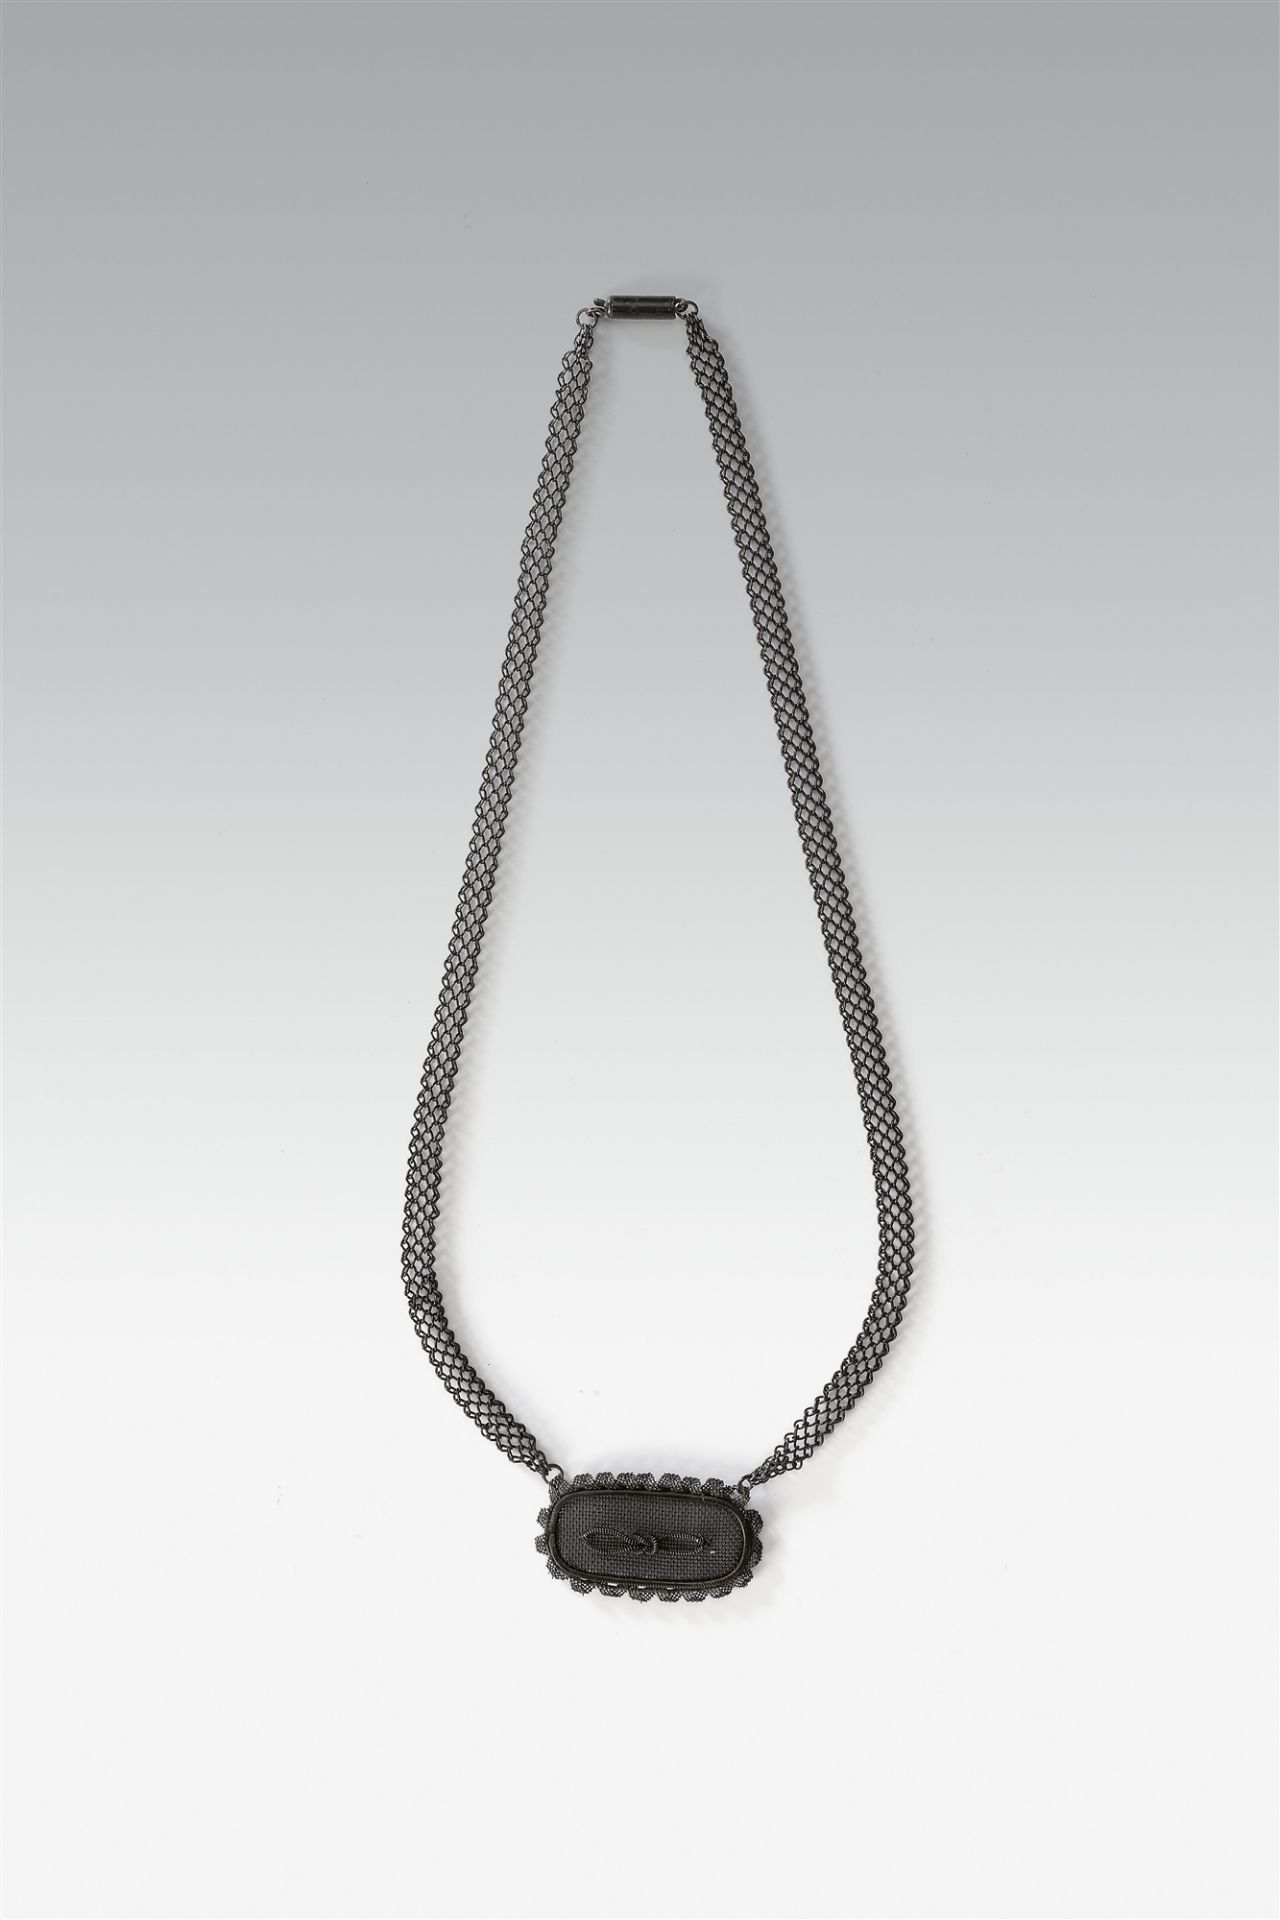 A cast iron pendant necklace with braided iron wire